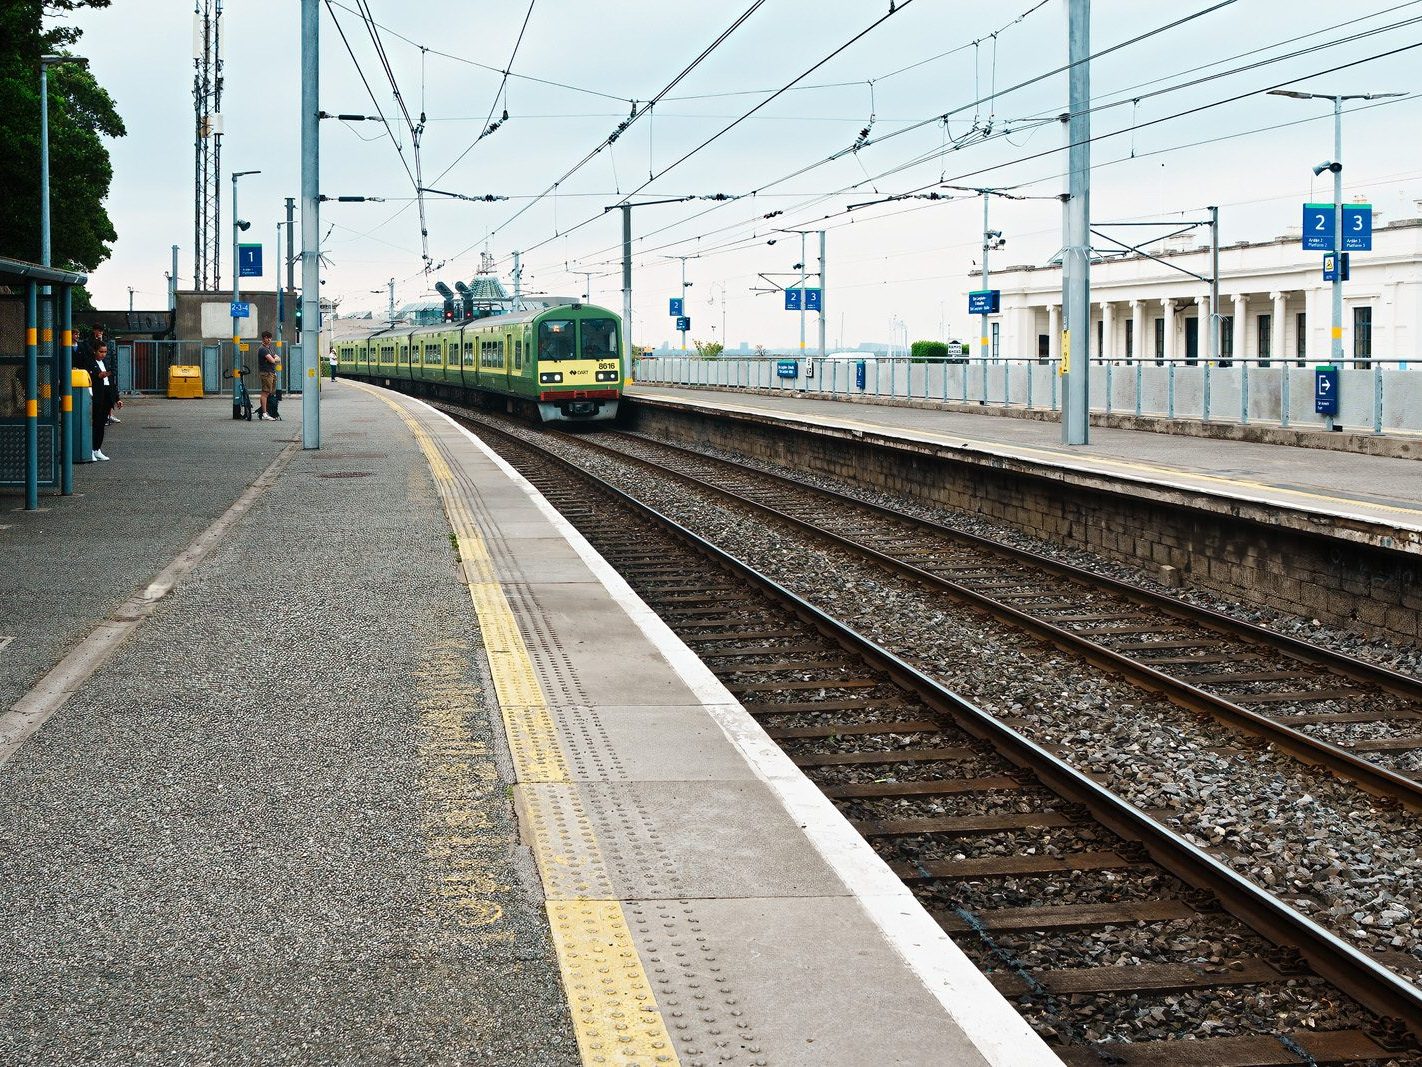 DID YOU KNOW THAT IT IS MALLIN STATION [THE TRAIN STATION IN DUN LAOGHAIRE] 004